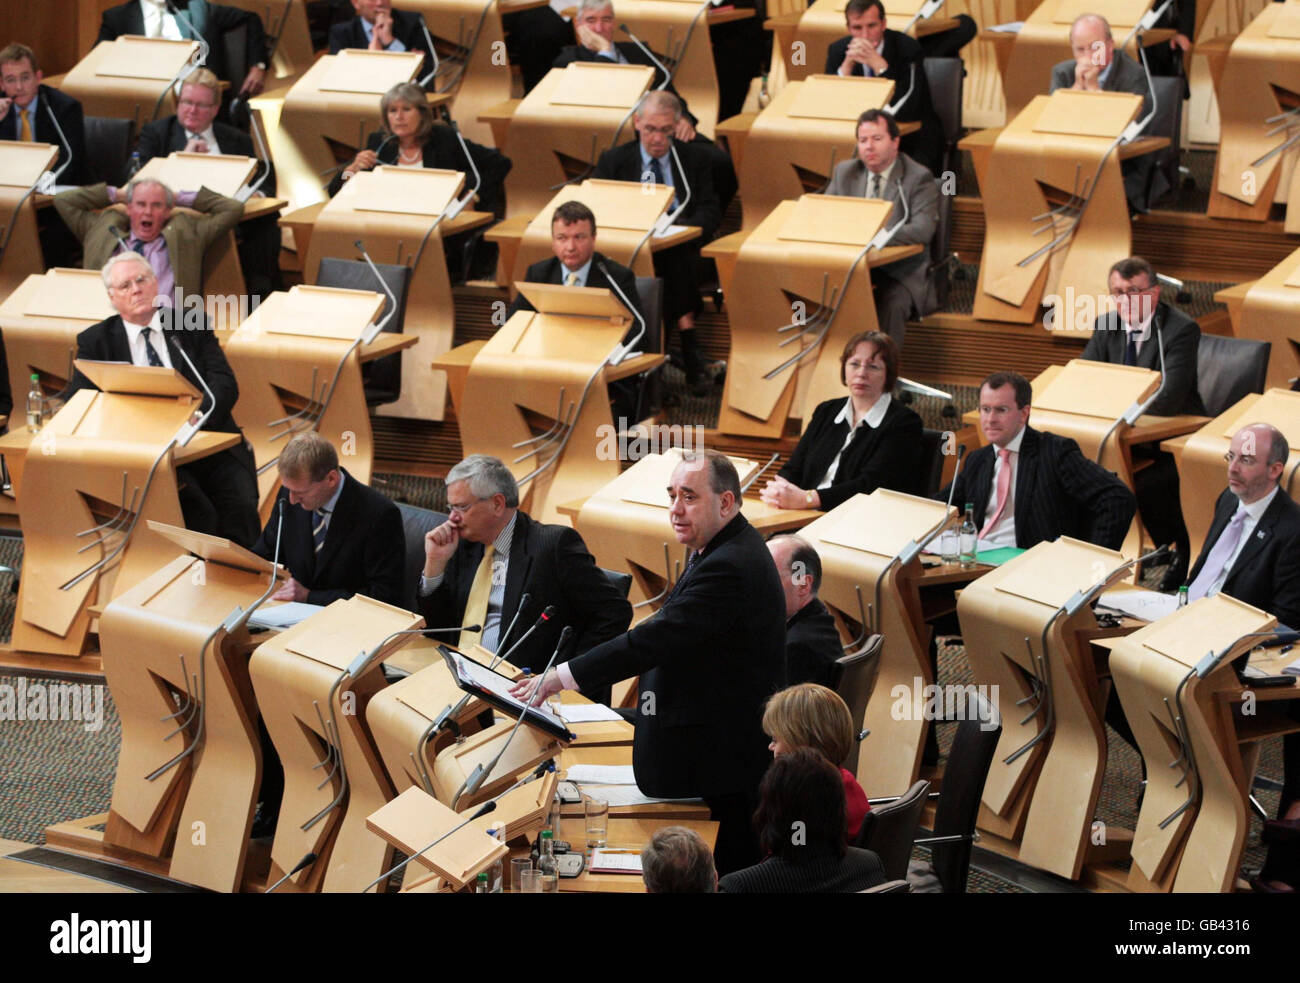 Scottish First Minister Alex Salmond (standing, bottom centre) takes questions at Question Time in the Scottish Parliament, Edinburgh. Stock Photo